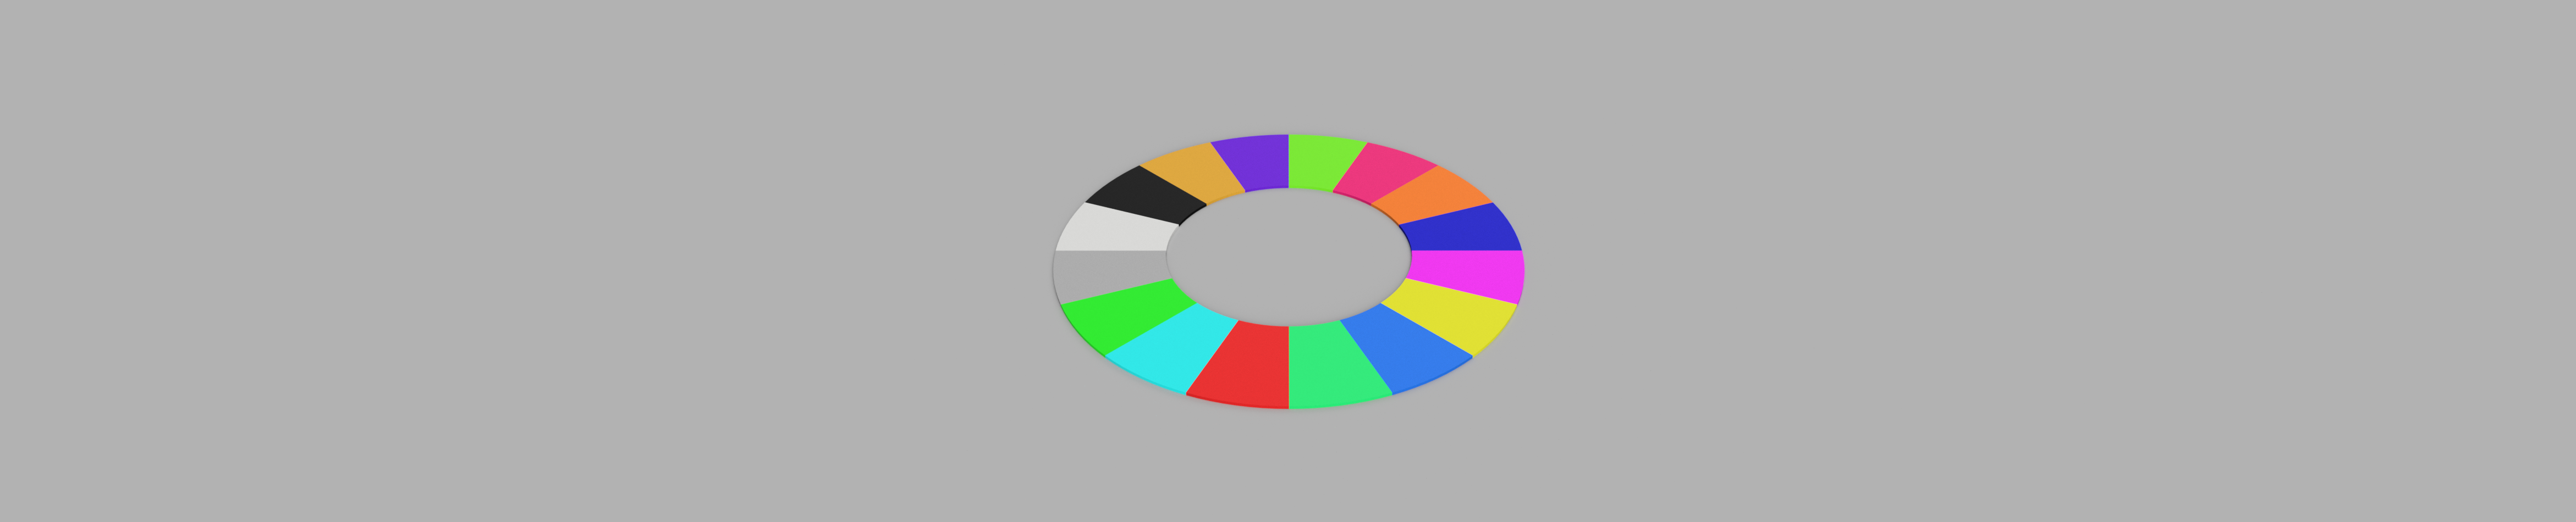 AMS Color Wheel Test by Chris Ondrovic | Download free STL model ...